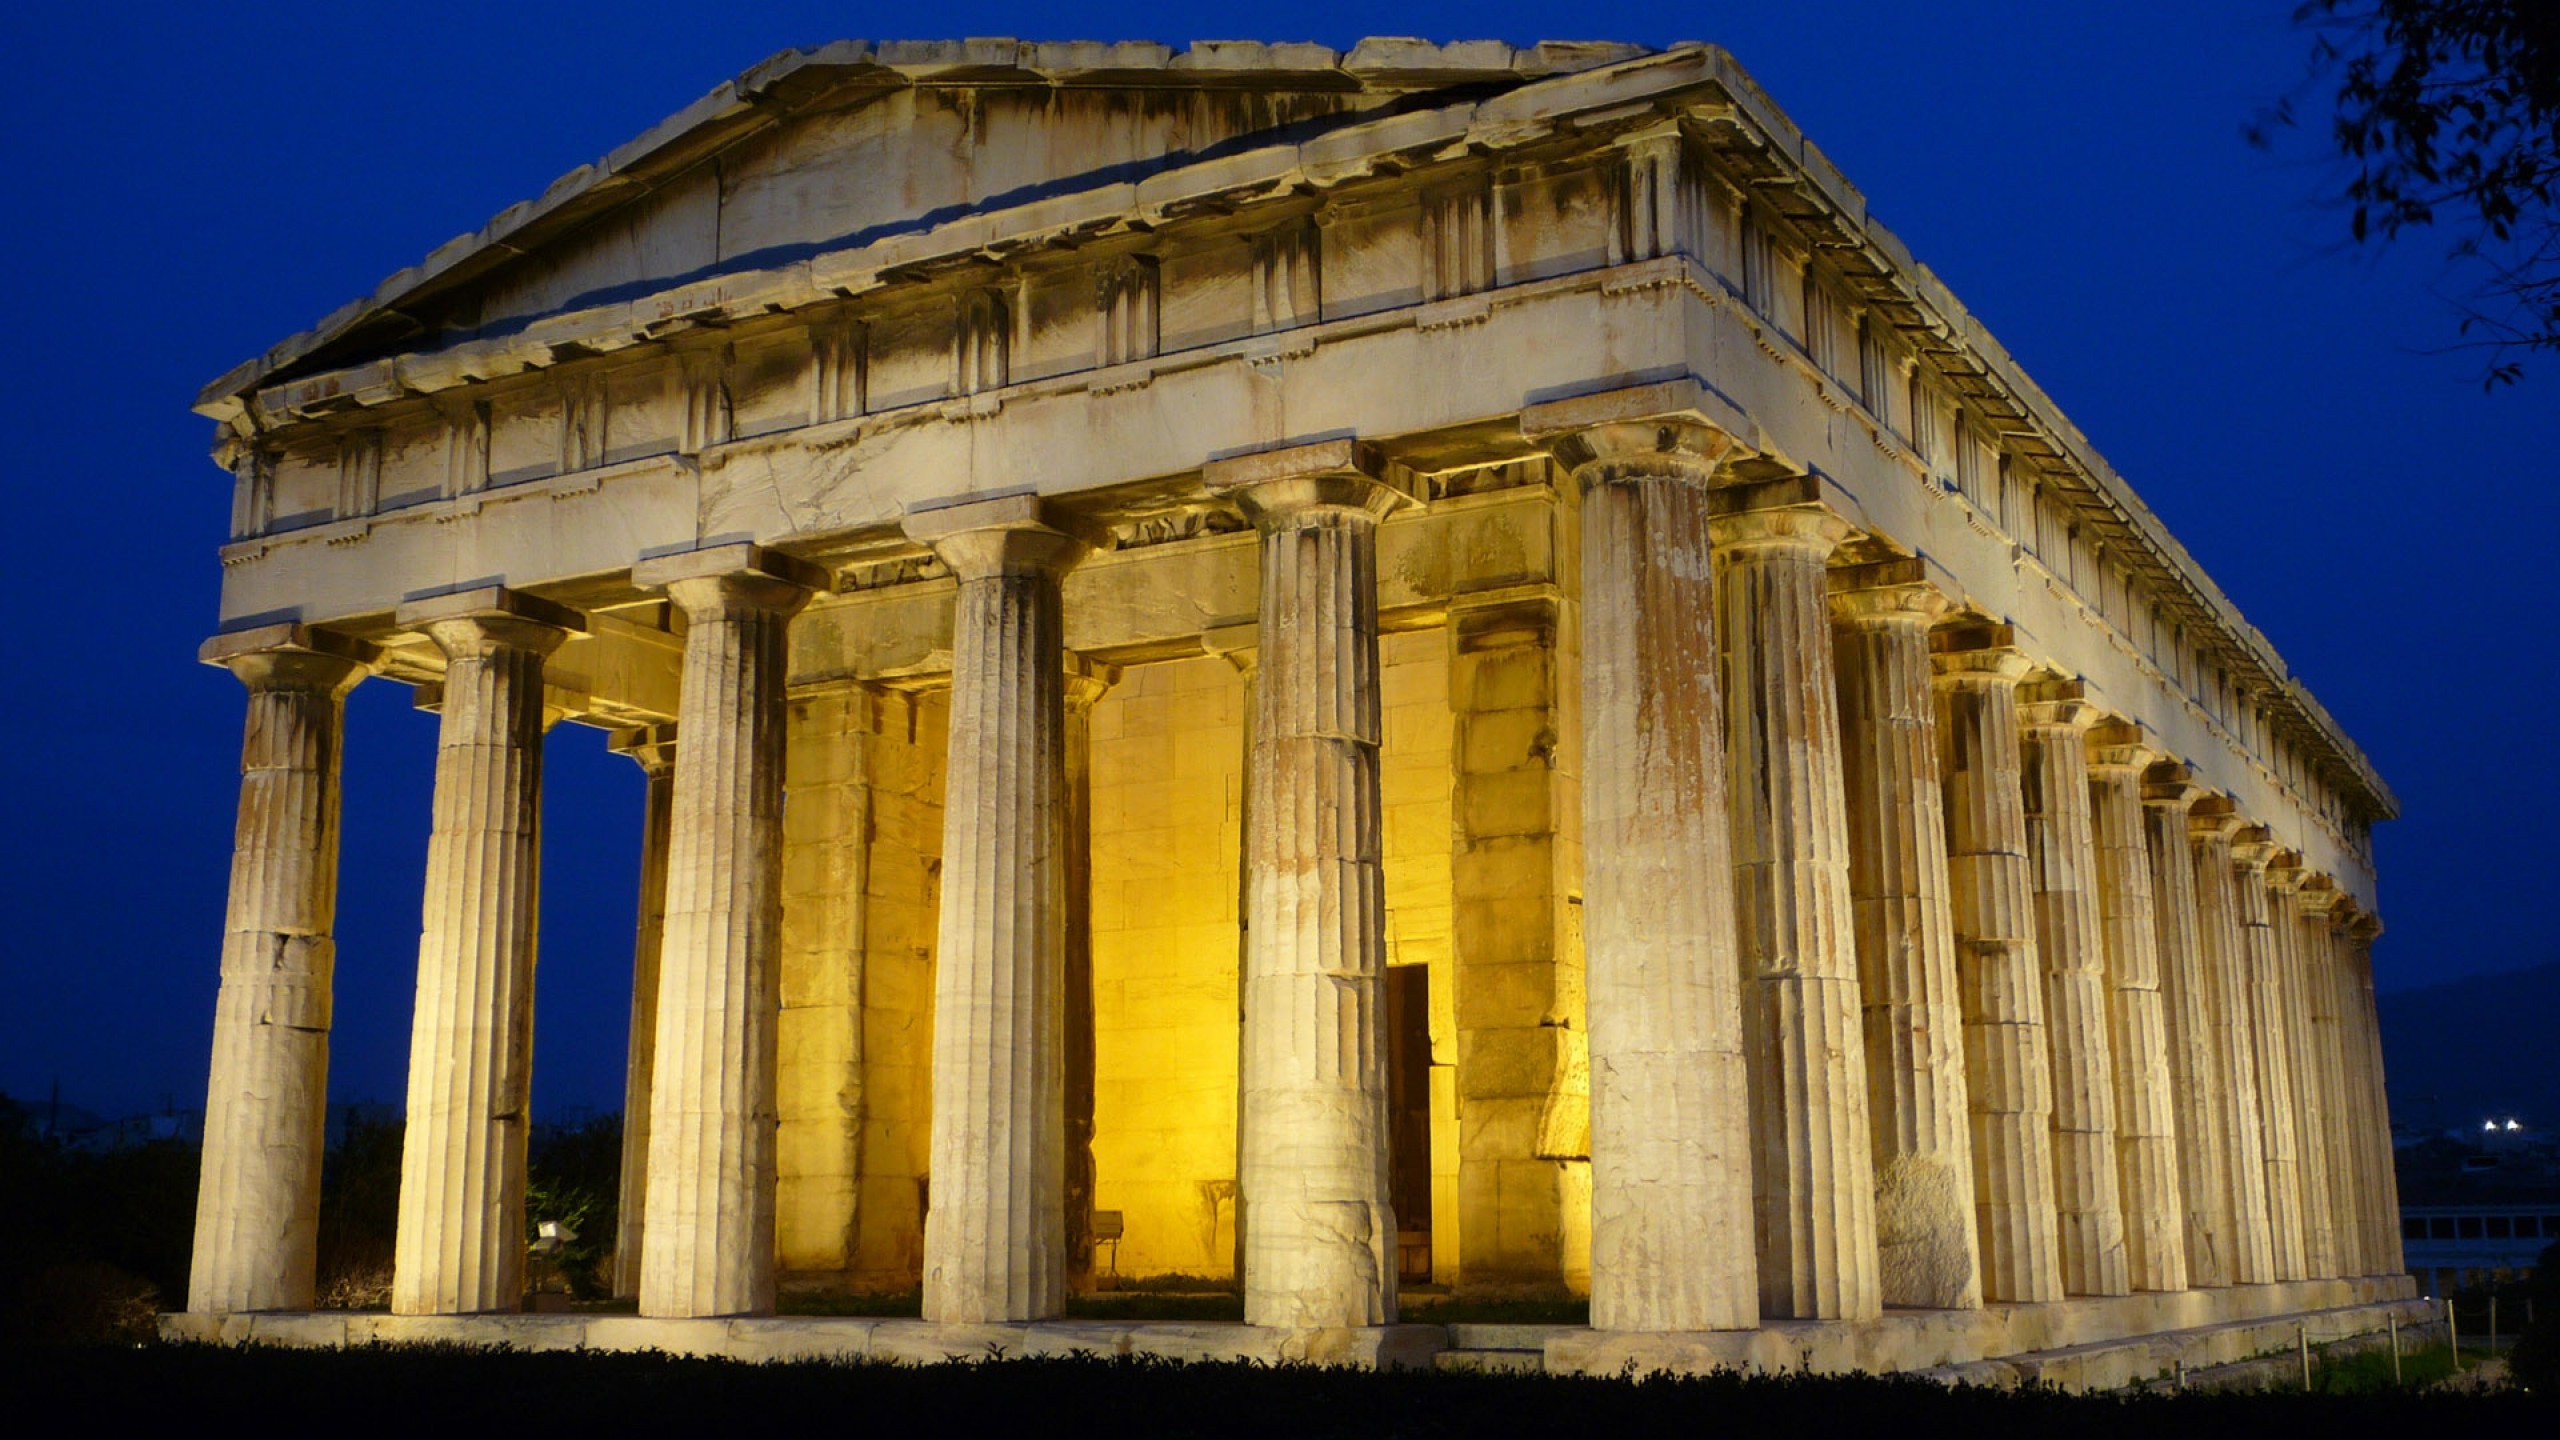 General 2560x1440 ancient architecture temple building Greece history landmark Europe